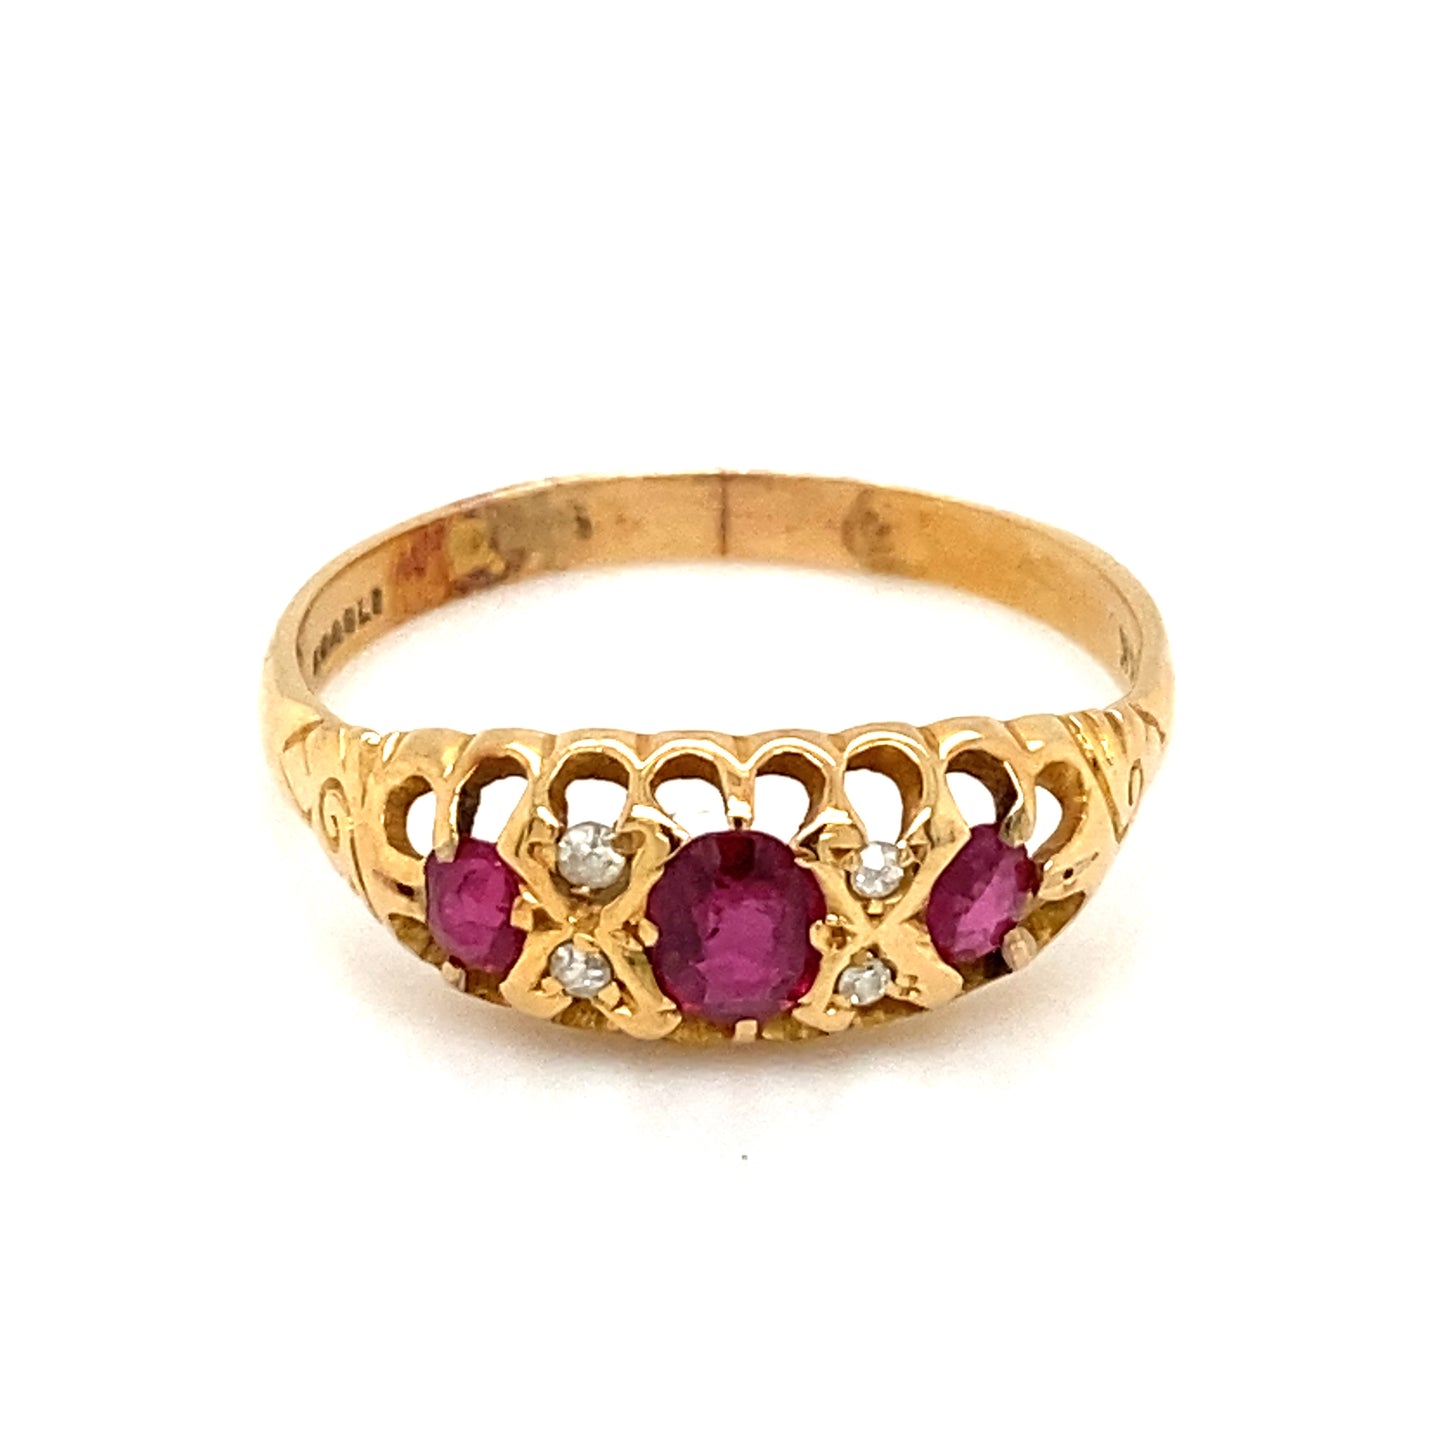 Circa 1910s Edwardian Oval Ruby and Diamond Ring in 14K Gold